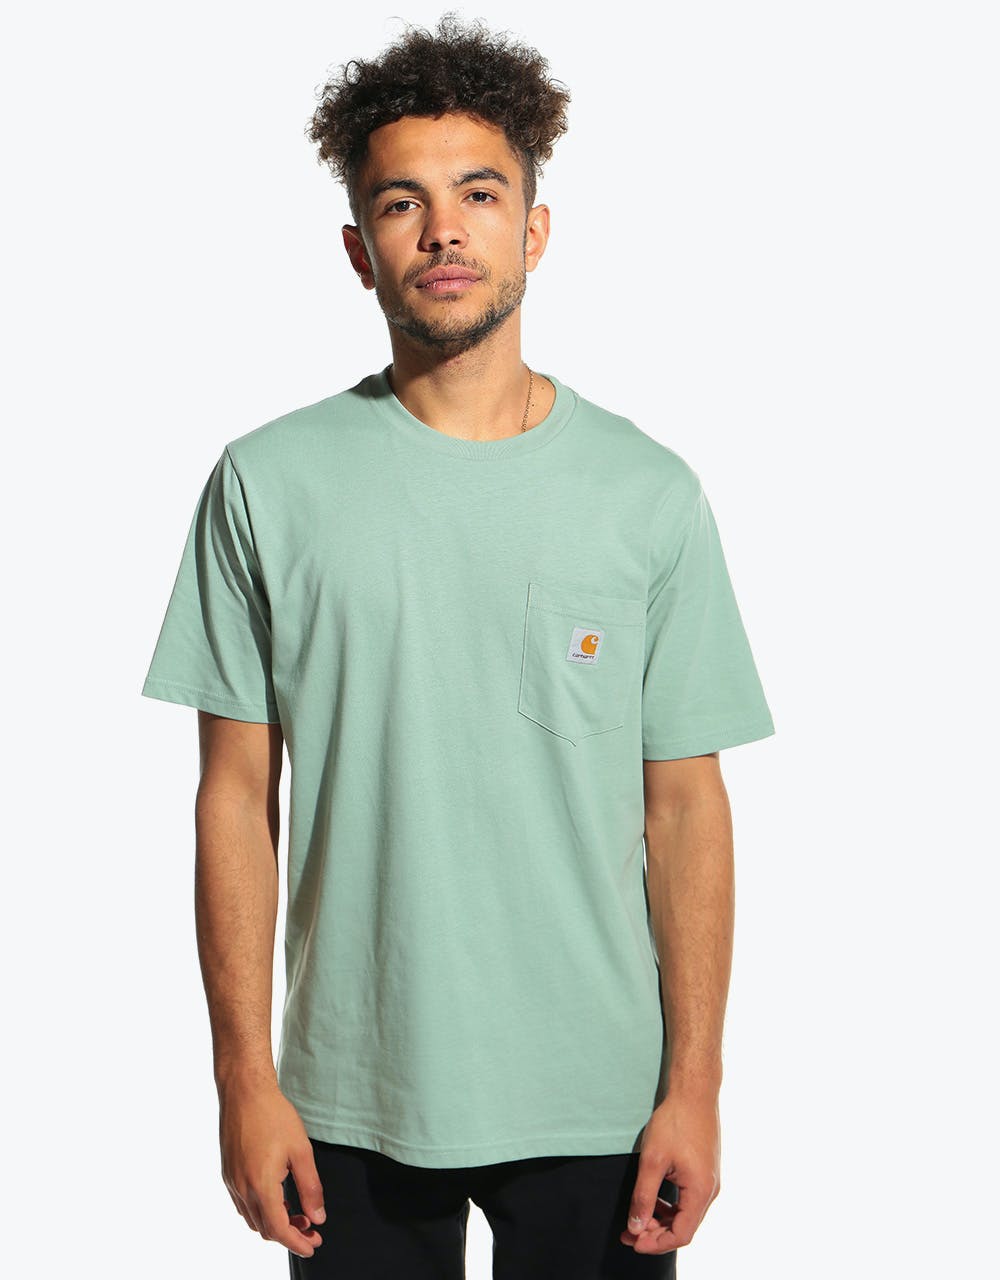 Carhartt WIP S/S Pocket T-Shirt - Frosted Green